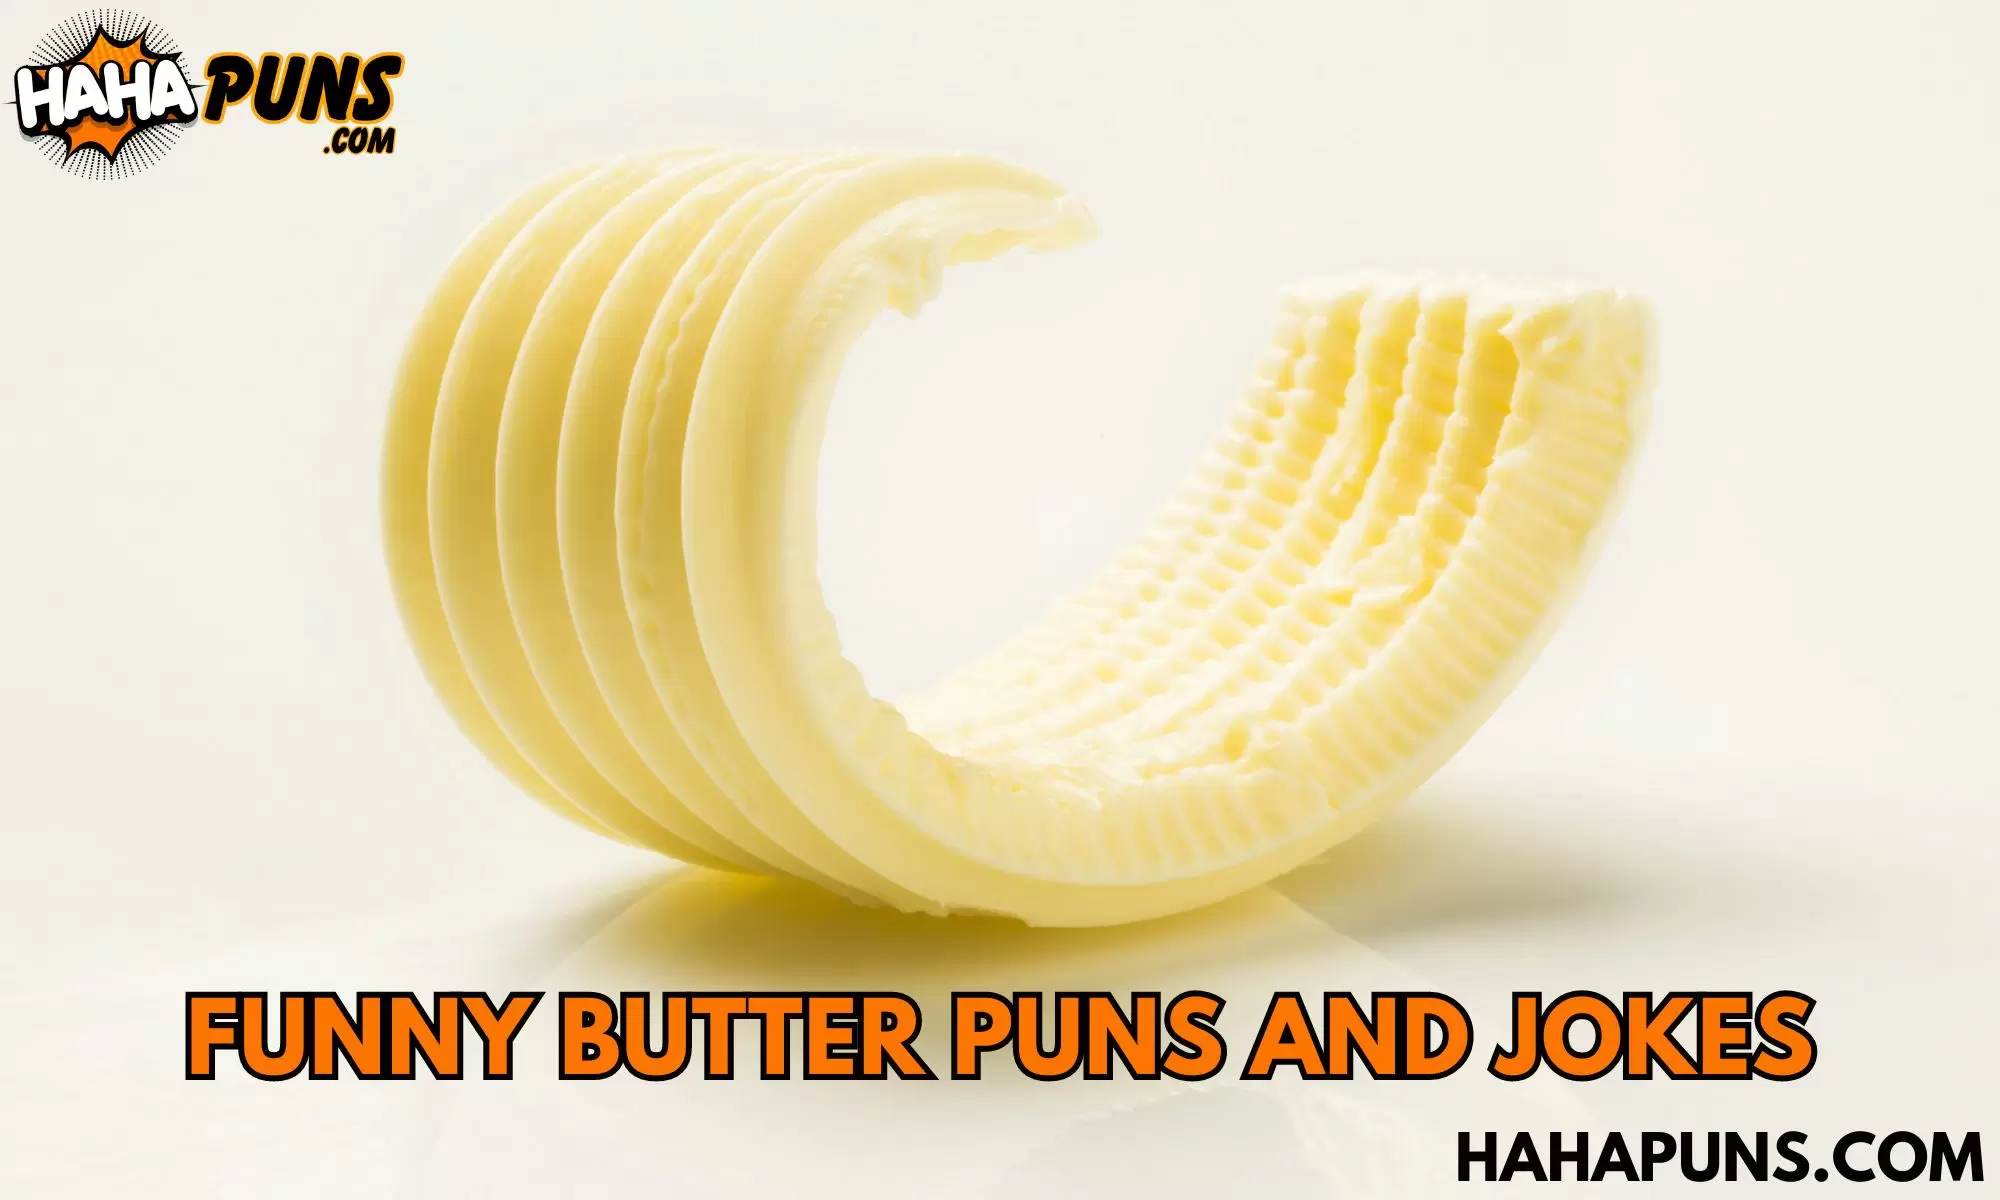 Funny Butter Puns And Jokes